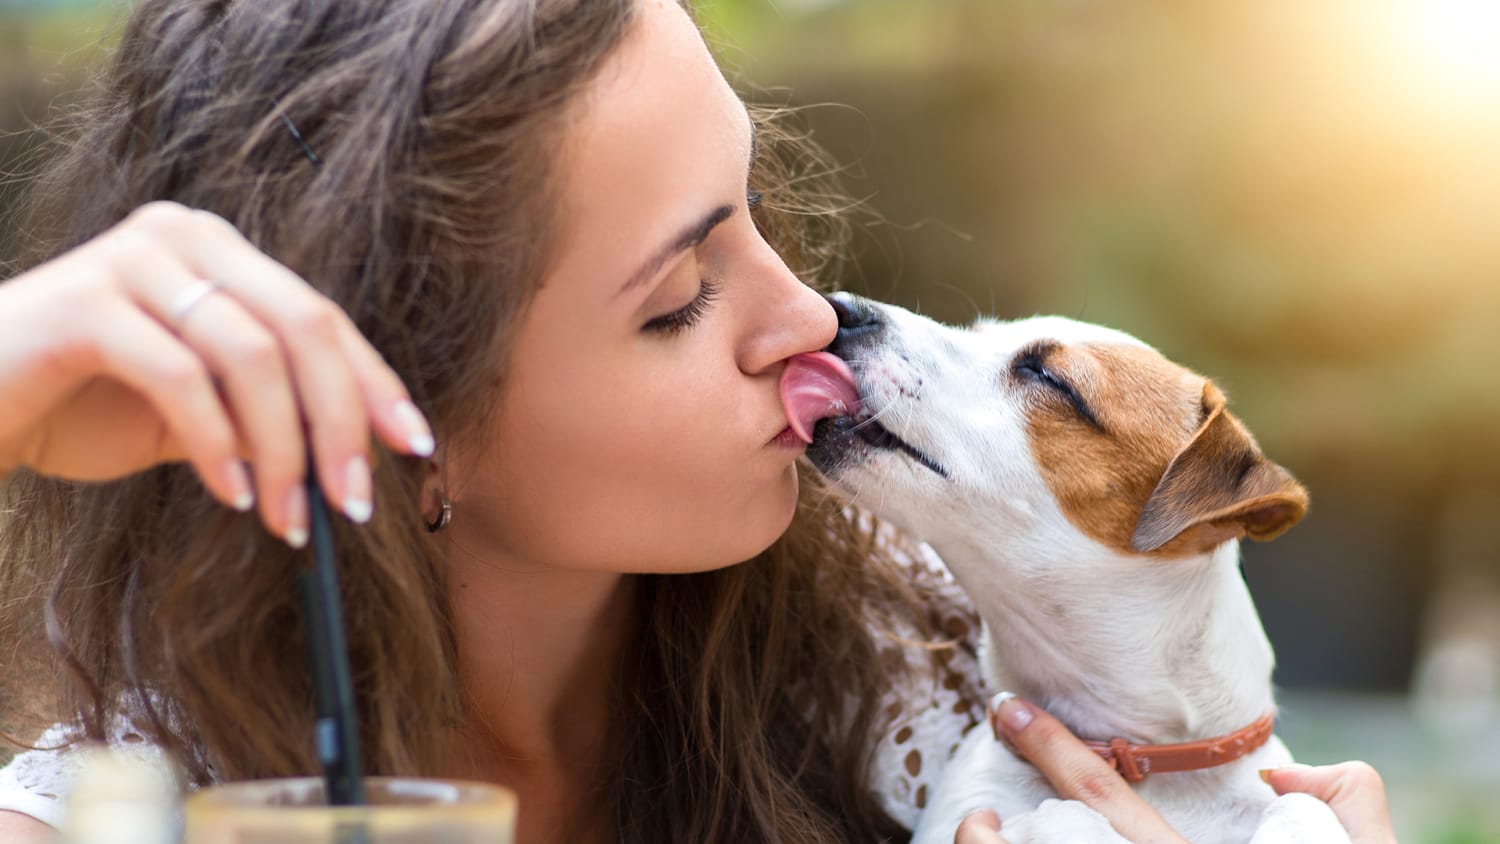 No pooch smooches! Scientists say you shouldn't let your dog lick your face